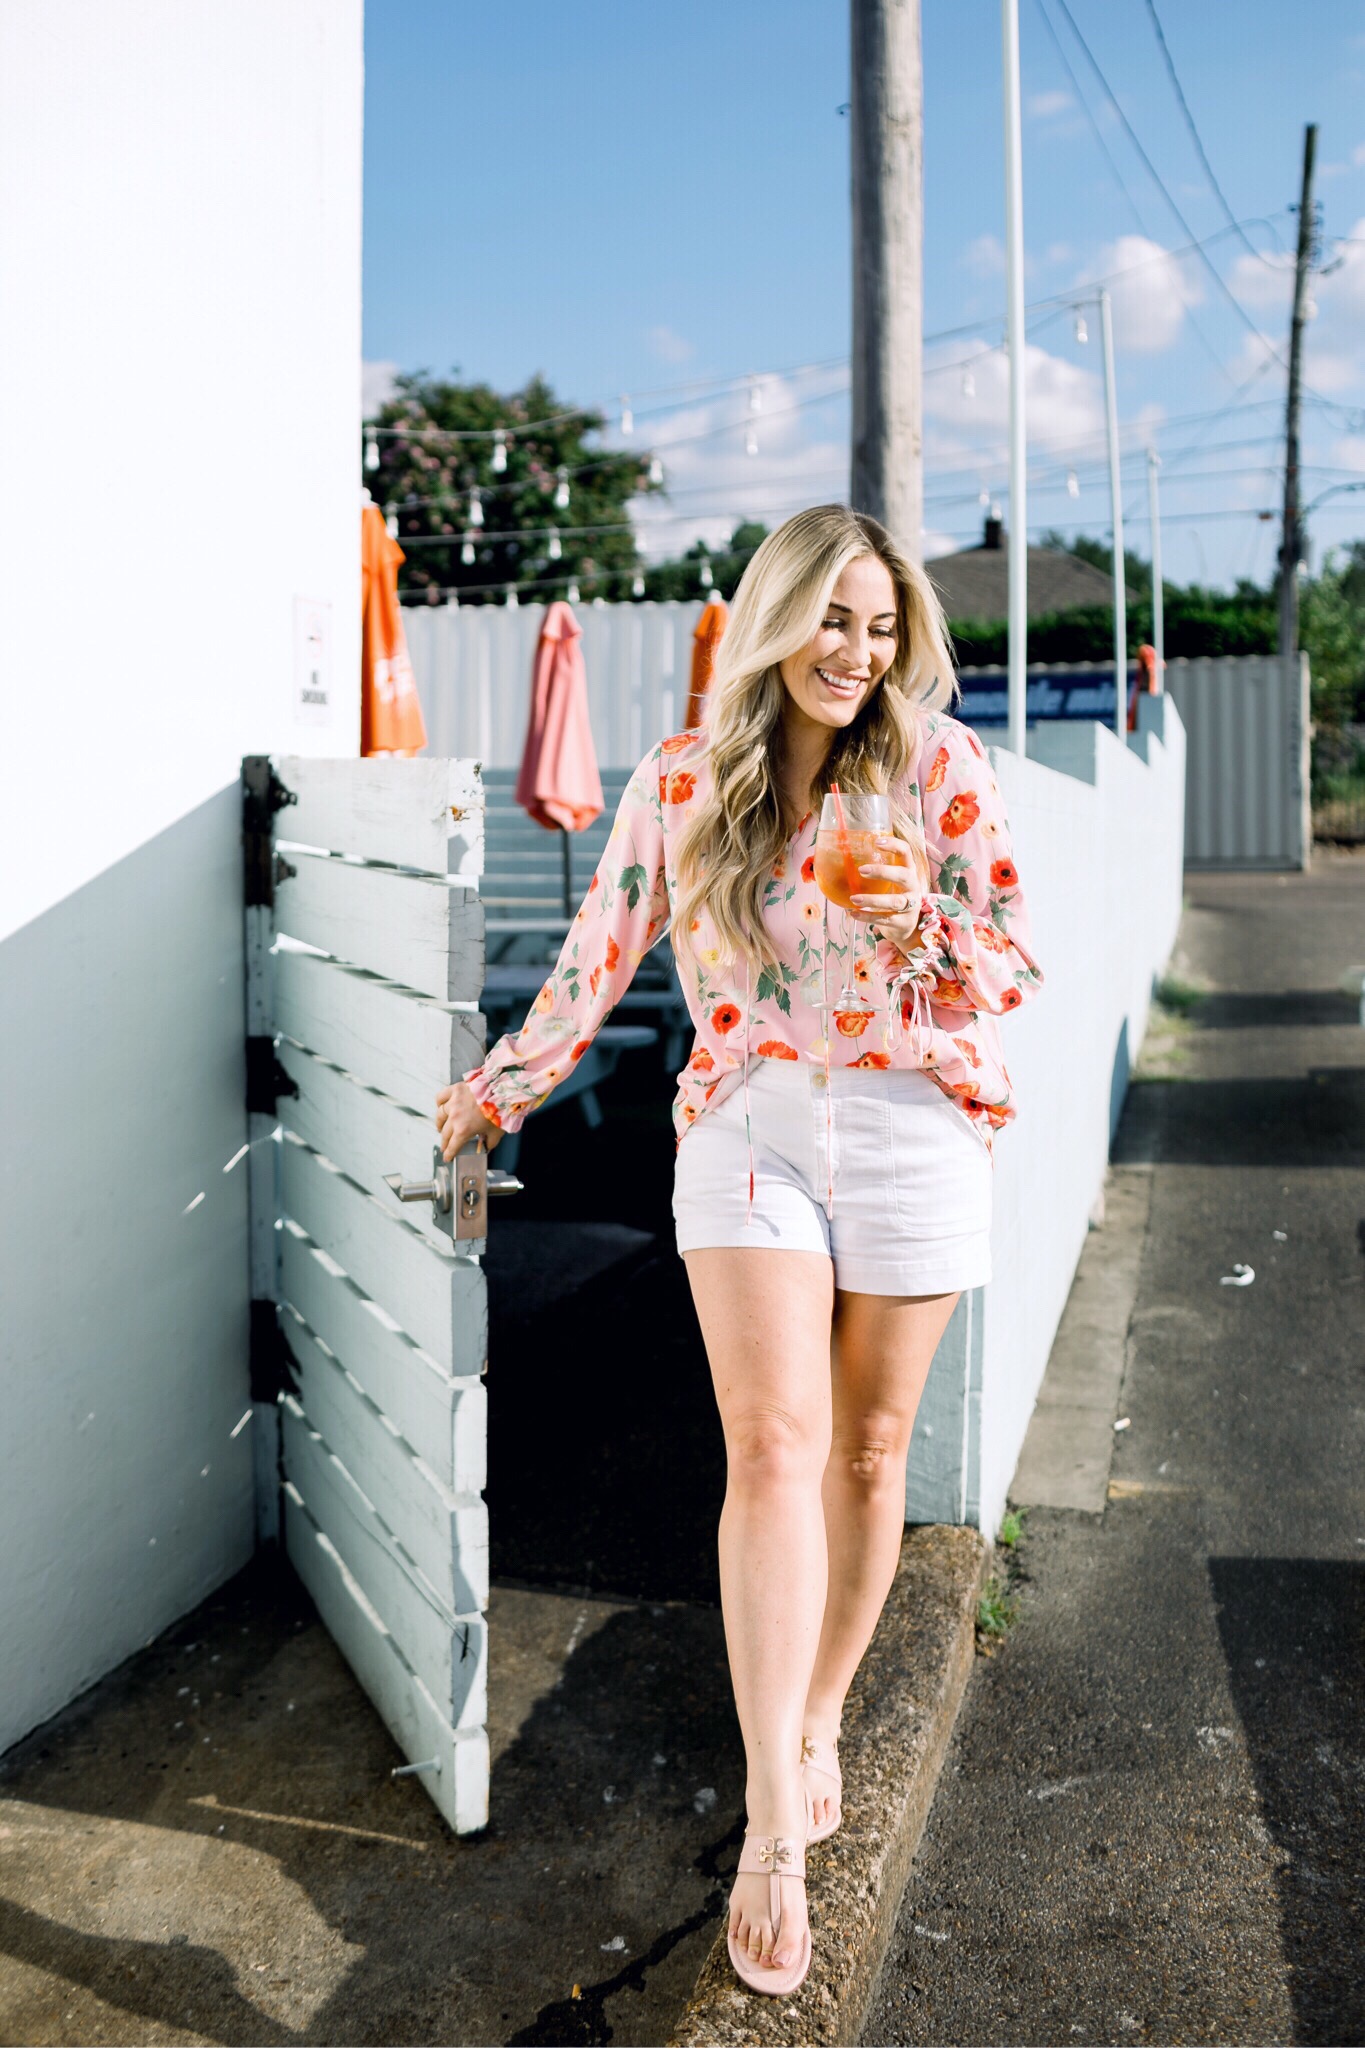 Bright summer colors fashion featured by top US fashion blog, Walking in Memphis in High Heels: image of a woman wearing a Gibson & Latimer floral shirt, Anthropologie high waisted white denim shorts, Tory Burch Miller flip flops and a David Yurman bracelet